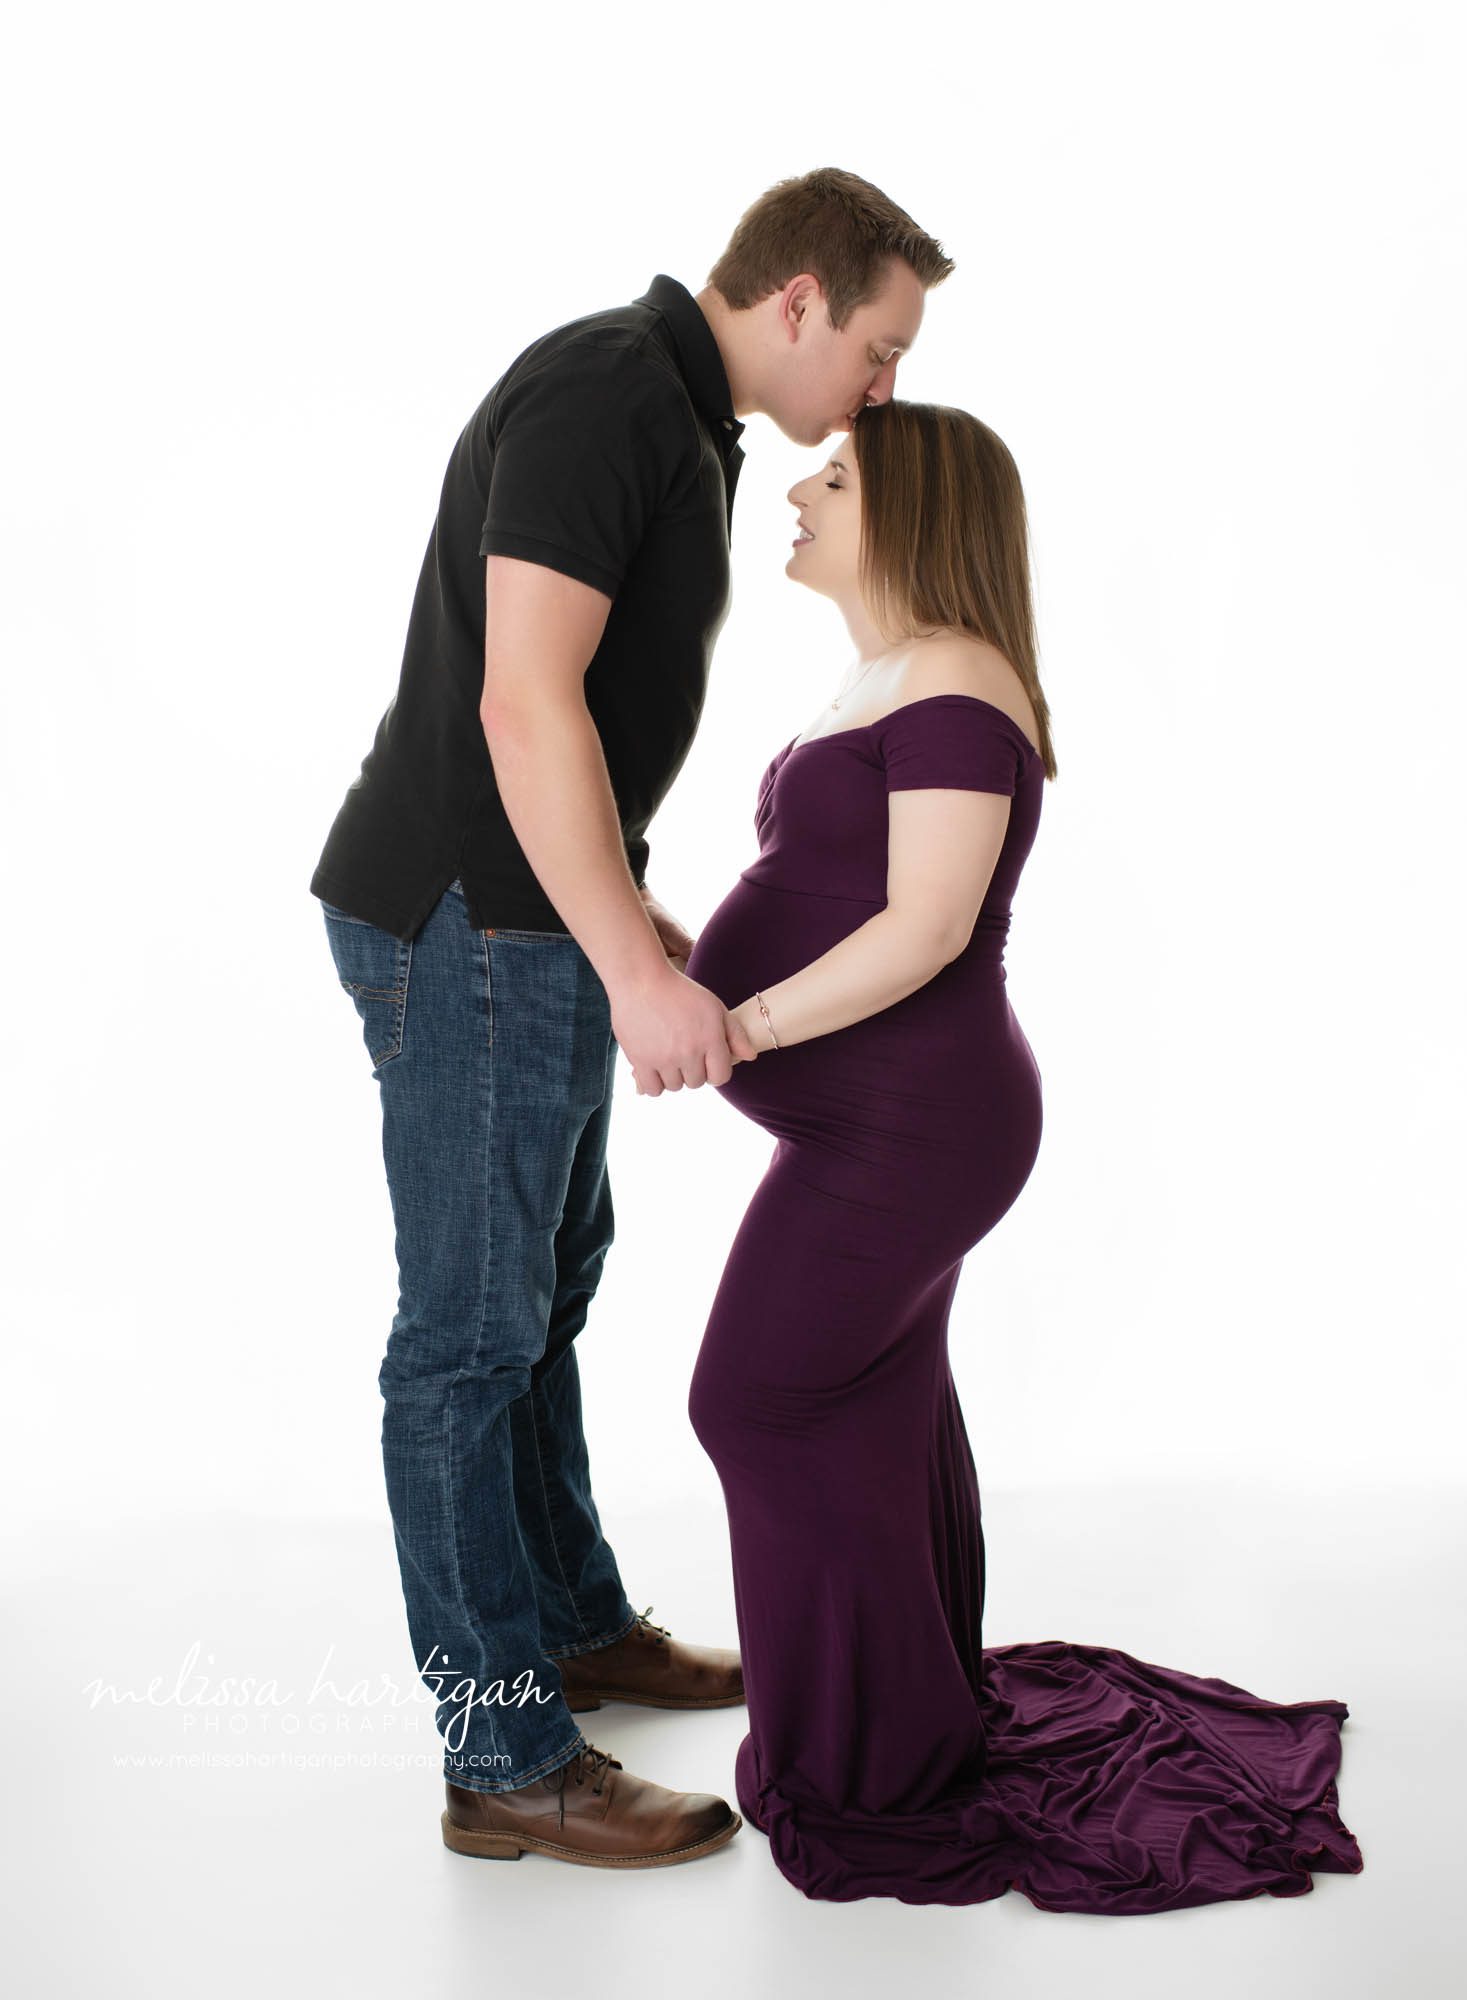 couples maternity photoshoot standing pose dad kissing mom on head photography CT maternity newborn photography